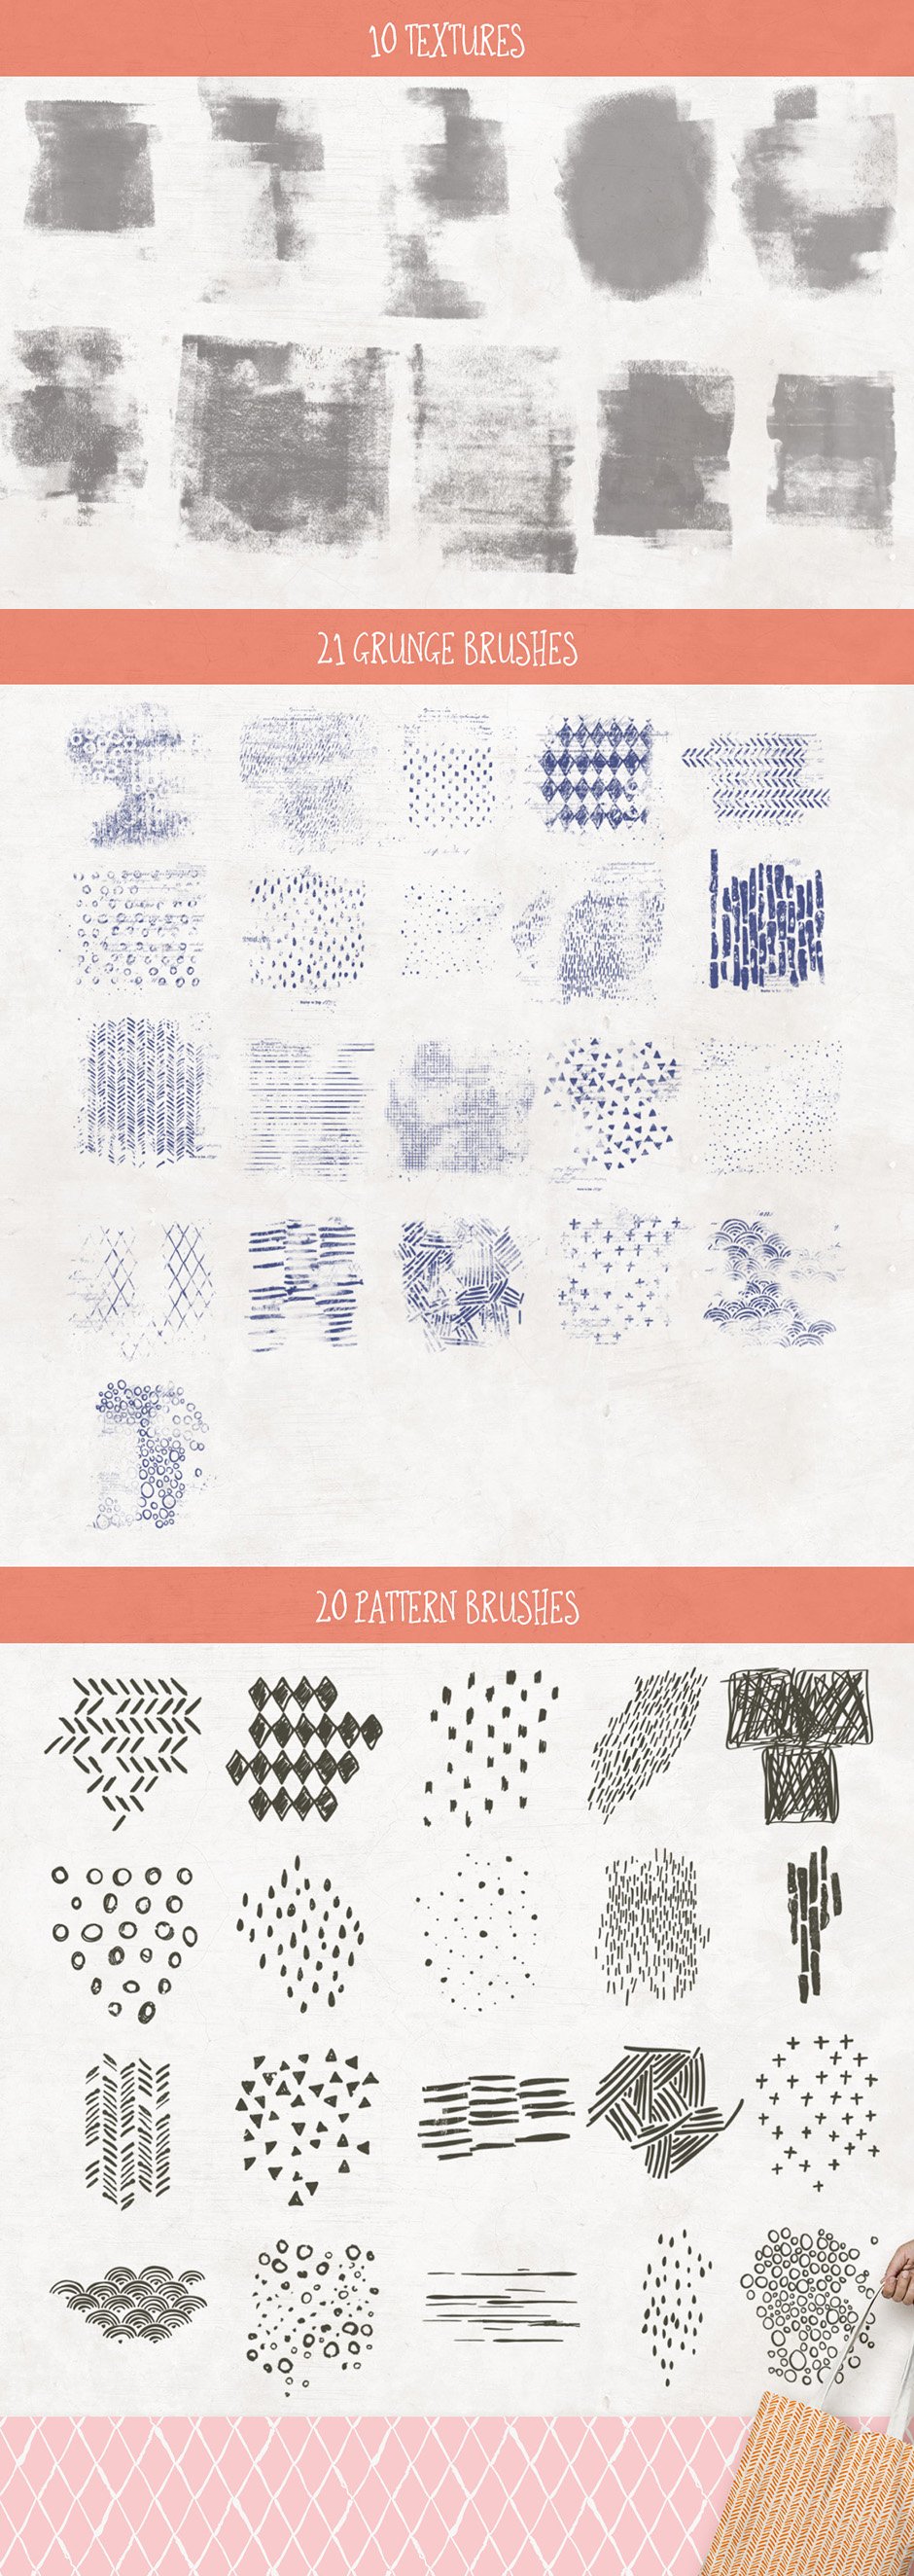 The Comprehensive Texture and Patterns Collection